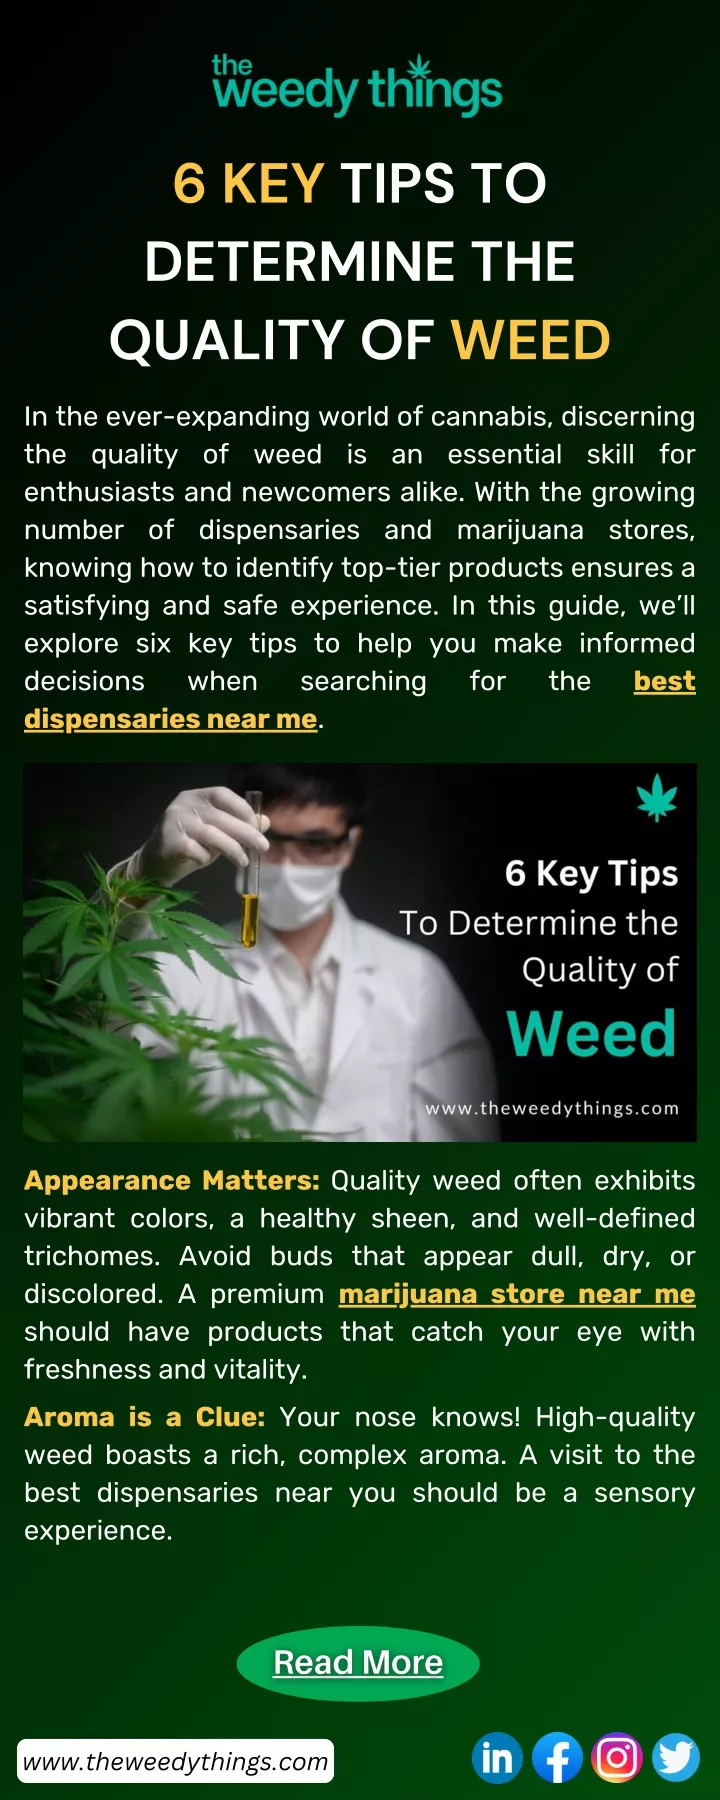 6 key tips to determine the quality of weed